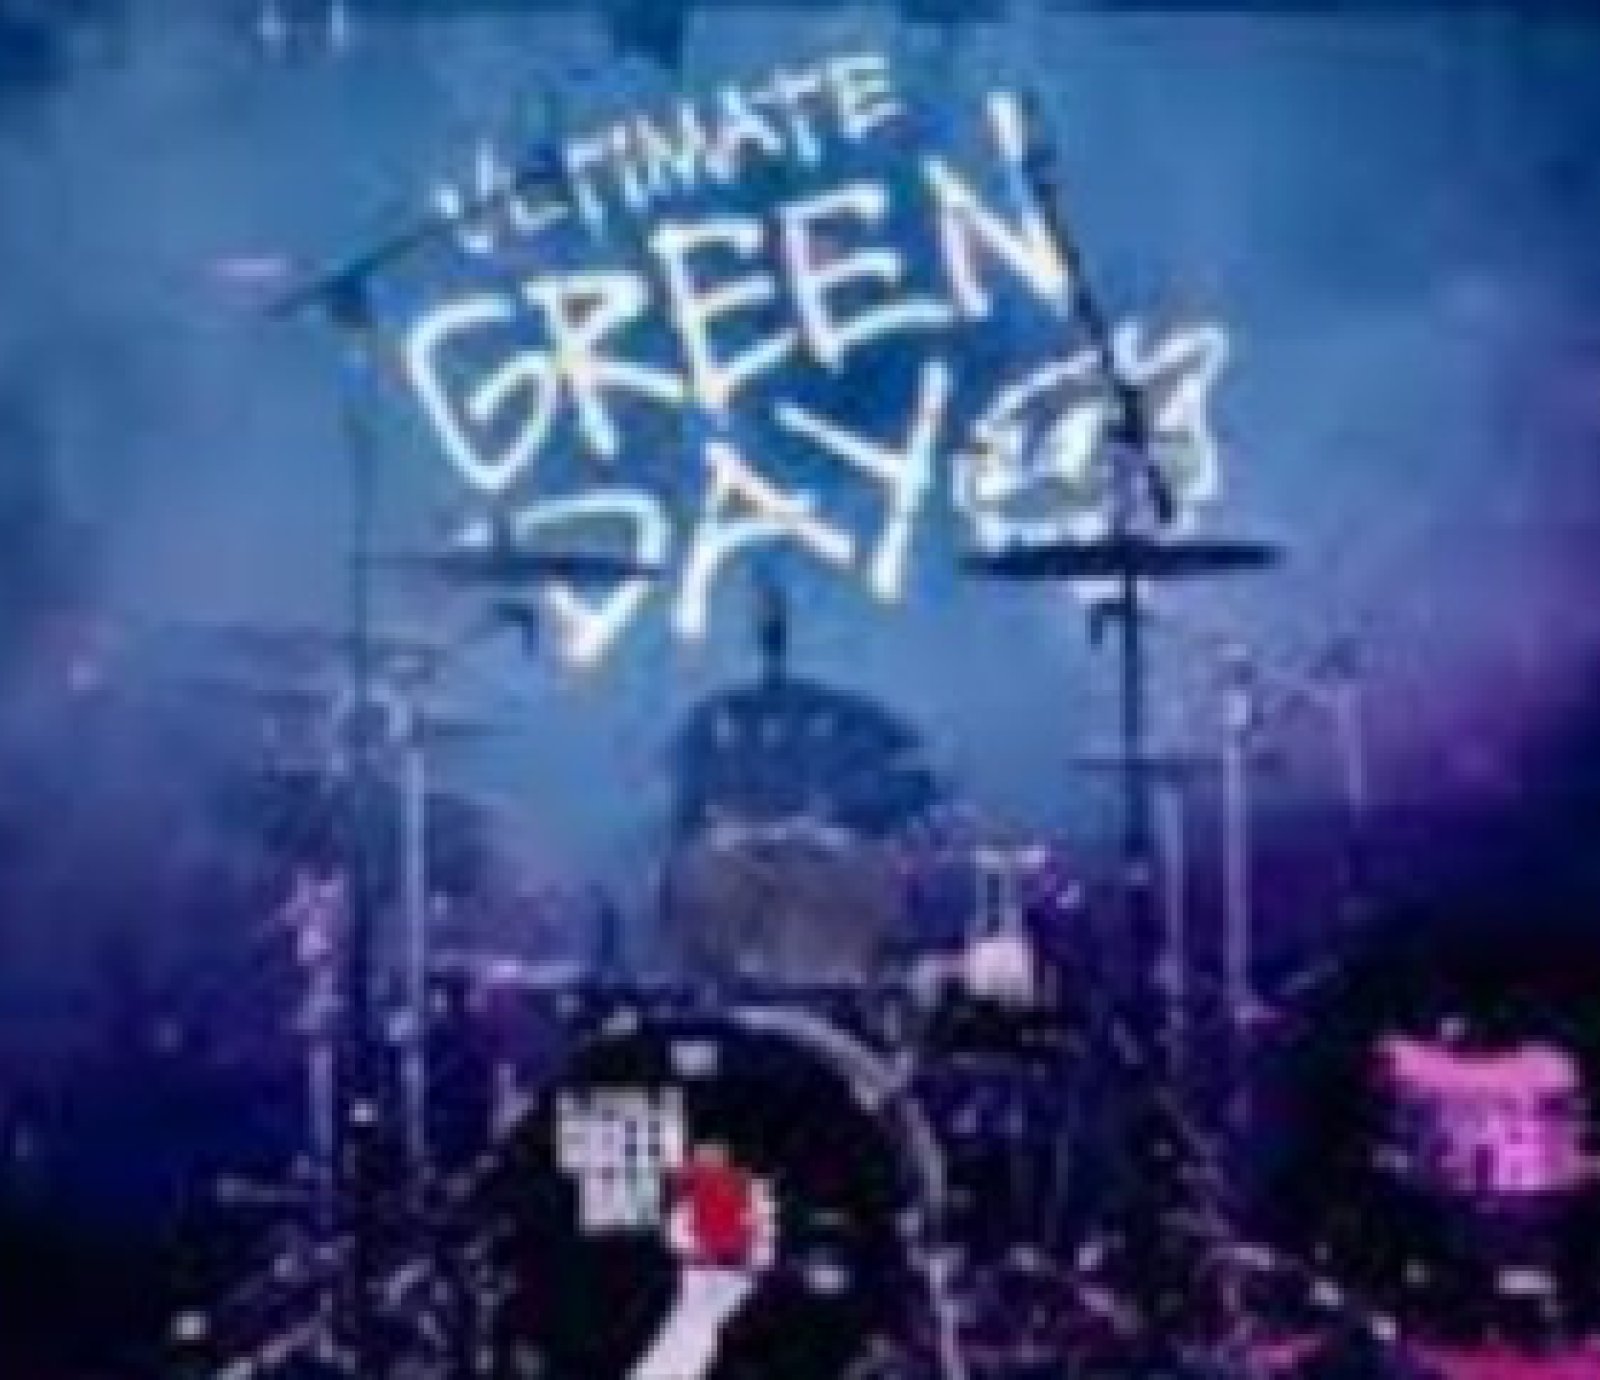 Ultimate Green Day